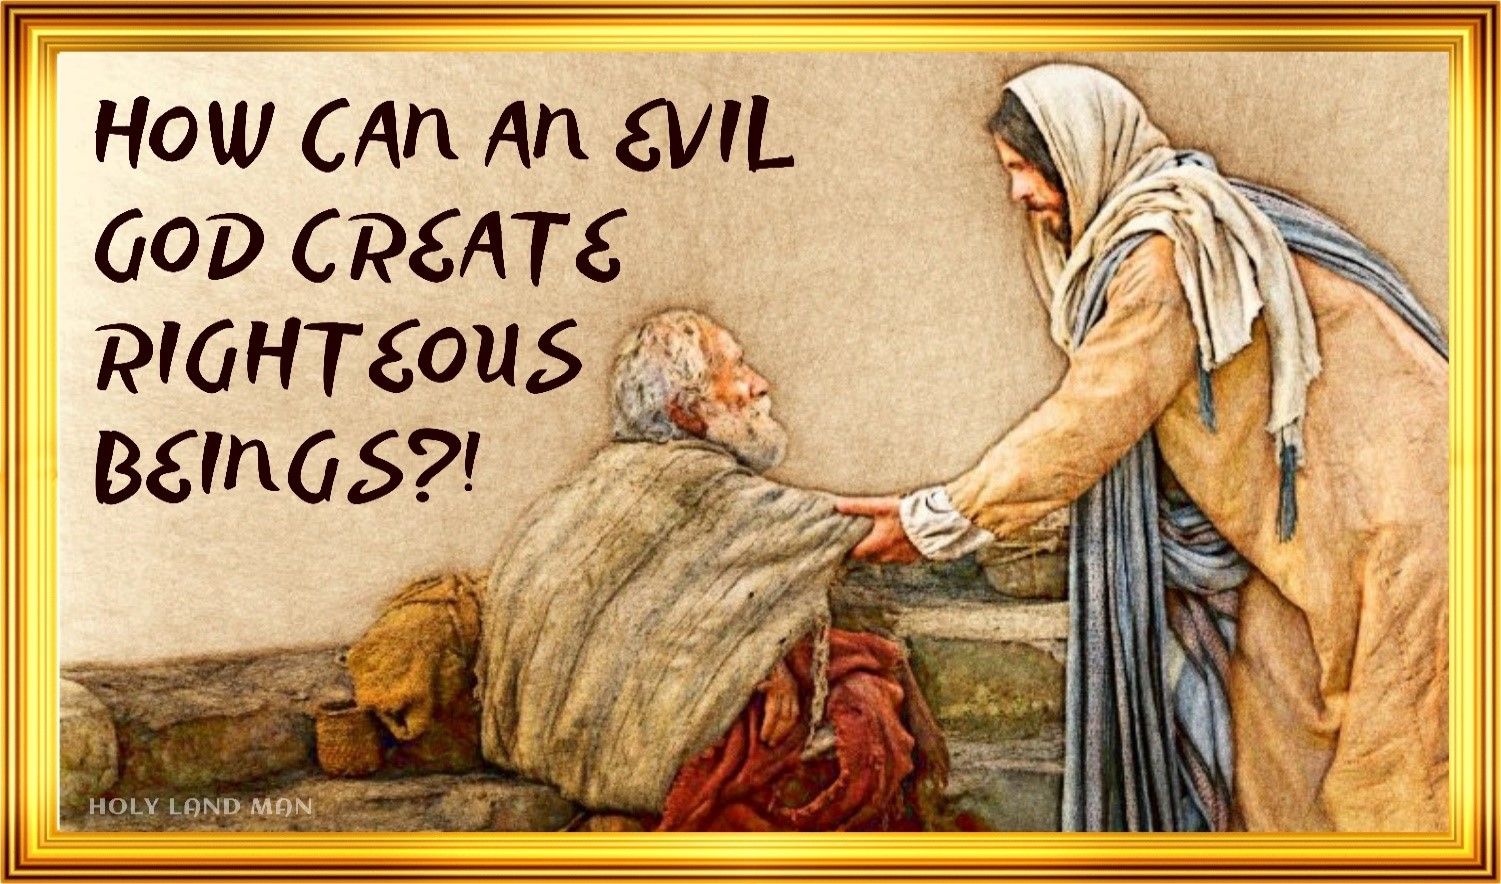 How can an evil God create righteous beings?